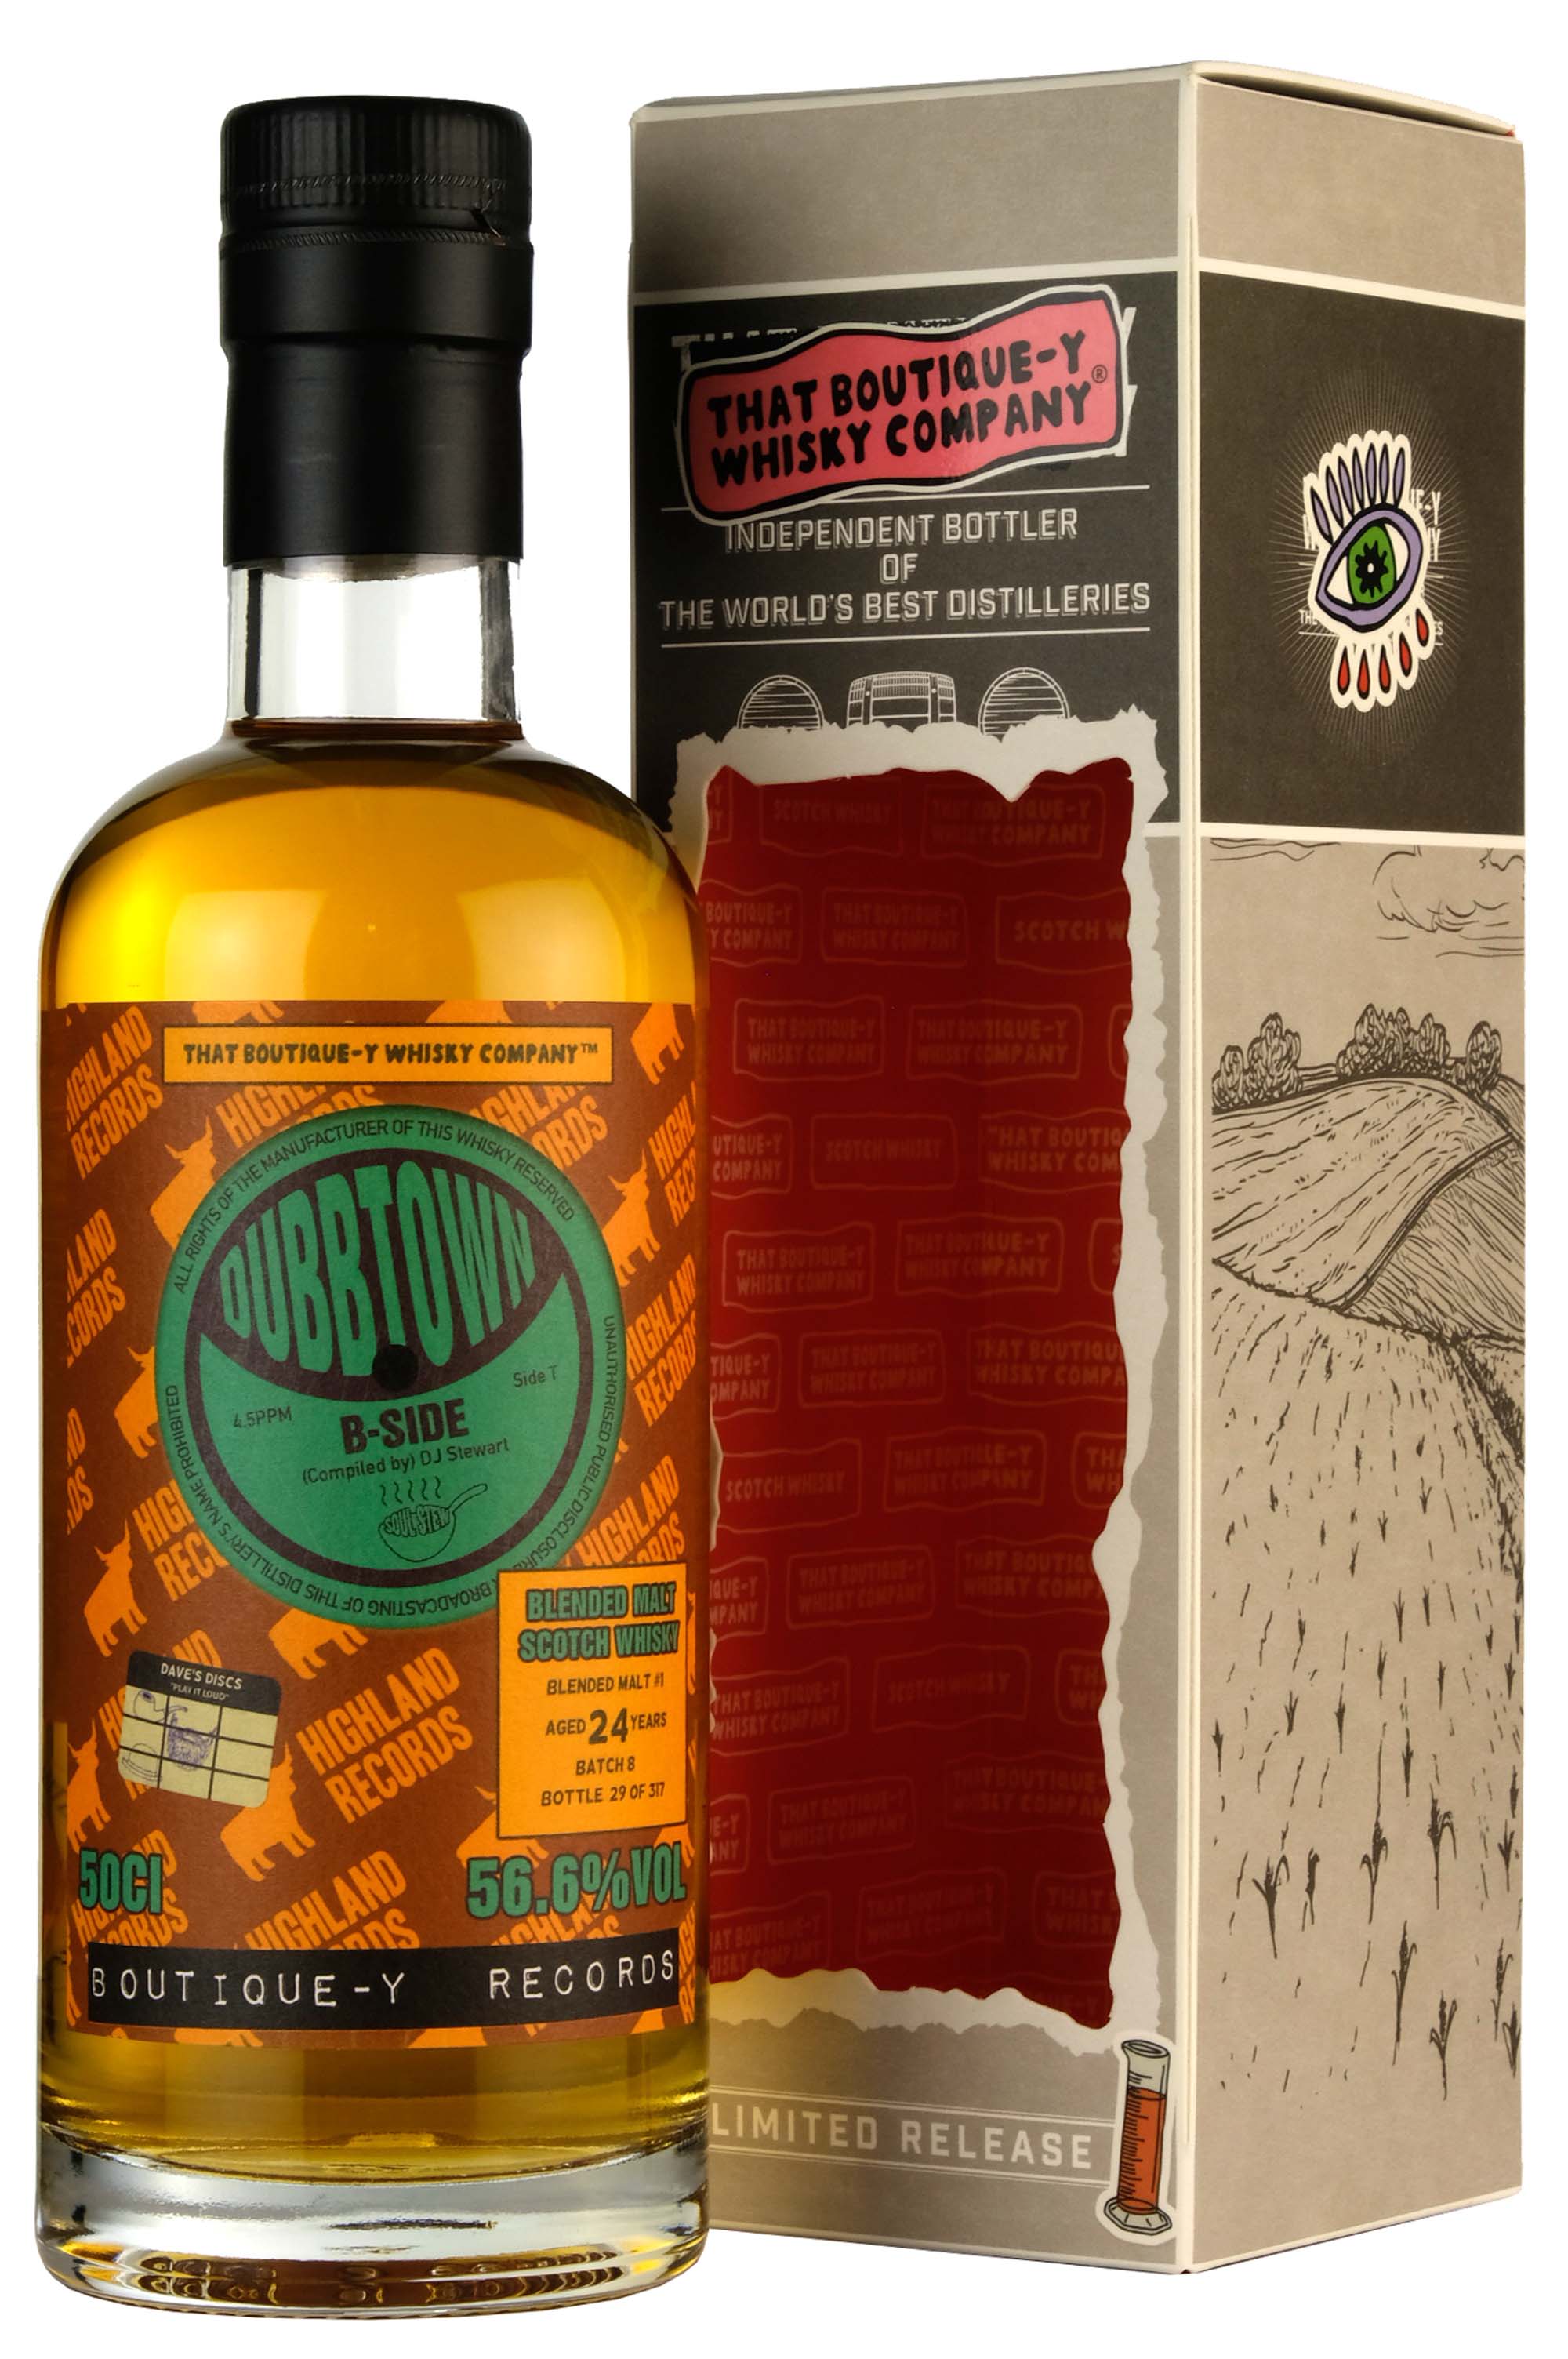 24 Year Old Blended Malt #1 | That Boutique-y Whisky Company Batch 8